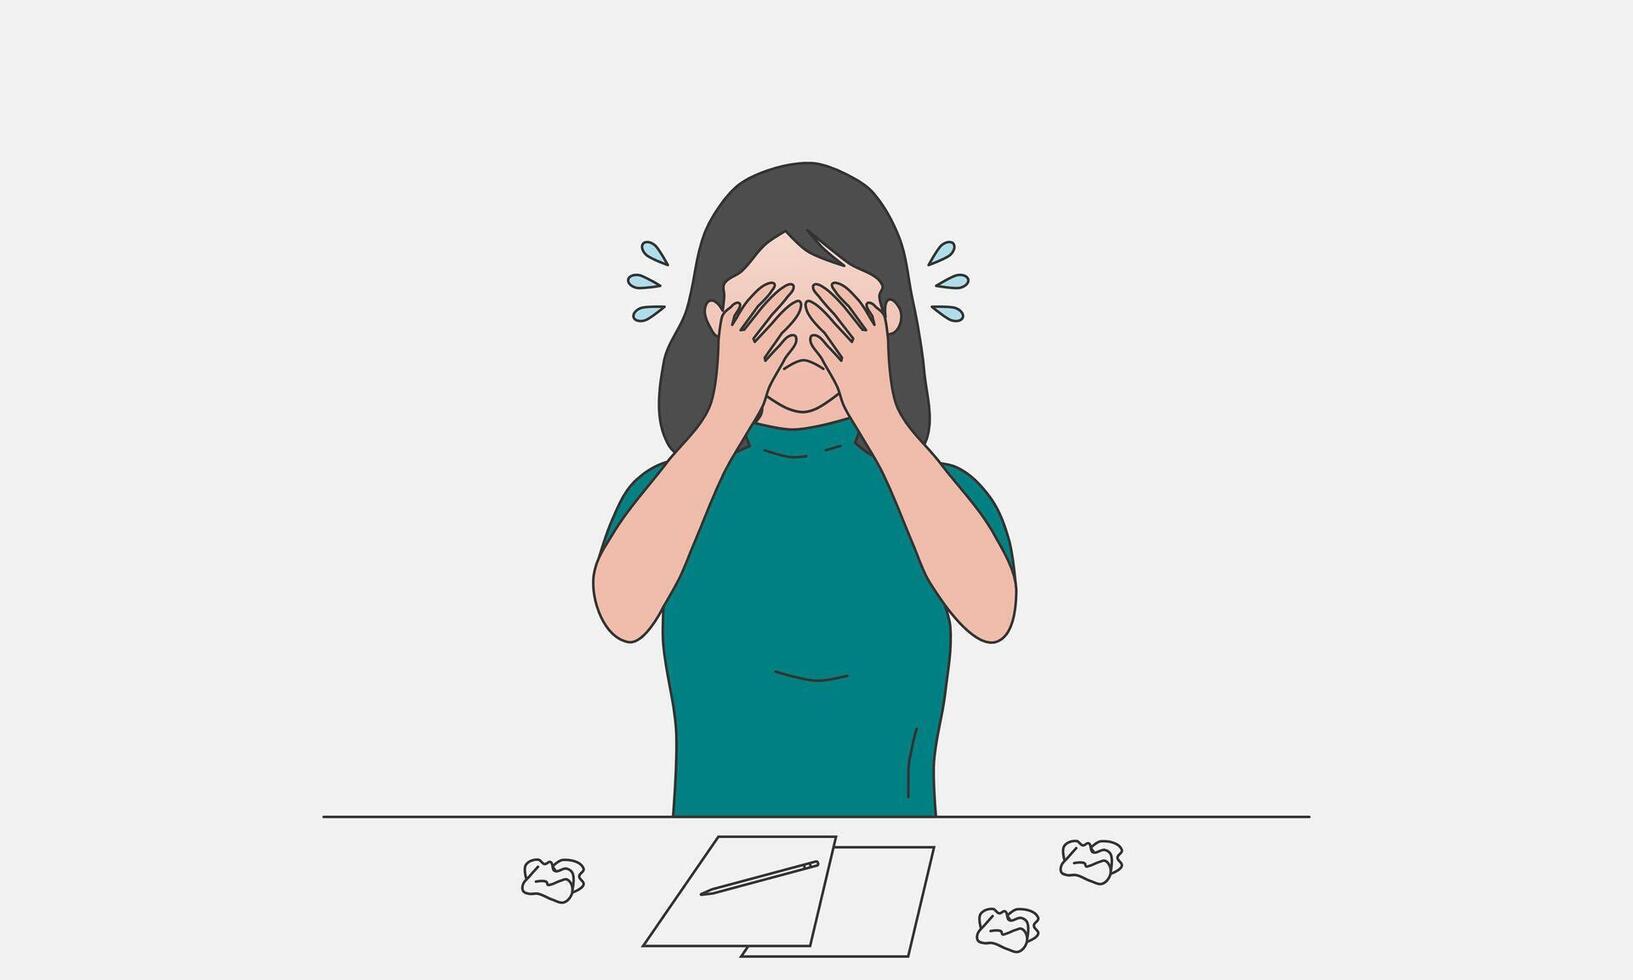 A crying woman. Depressed woman cover her face with hands. Vector illustration.